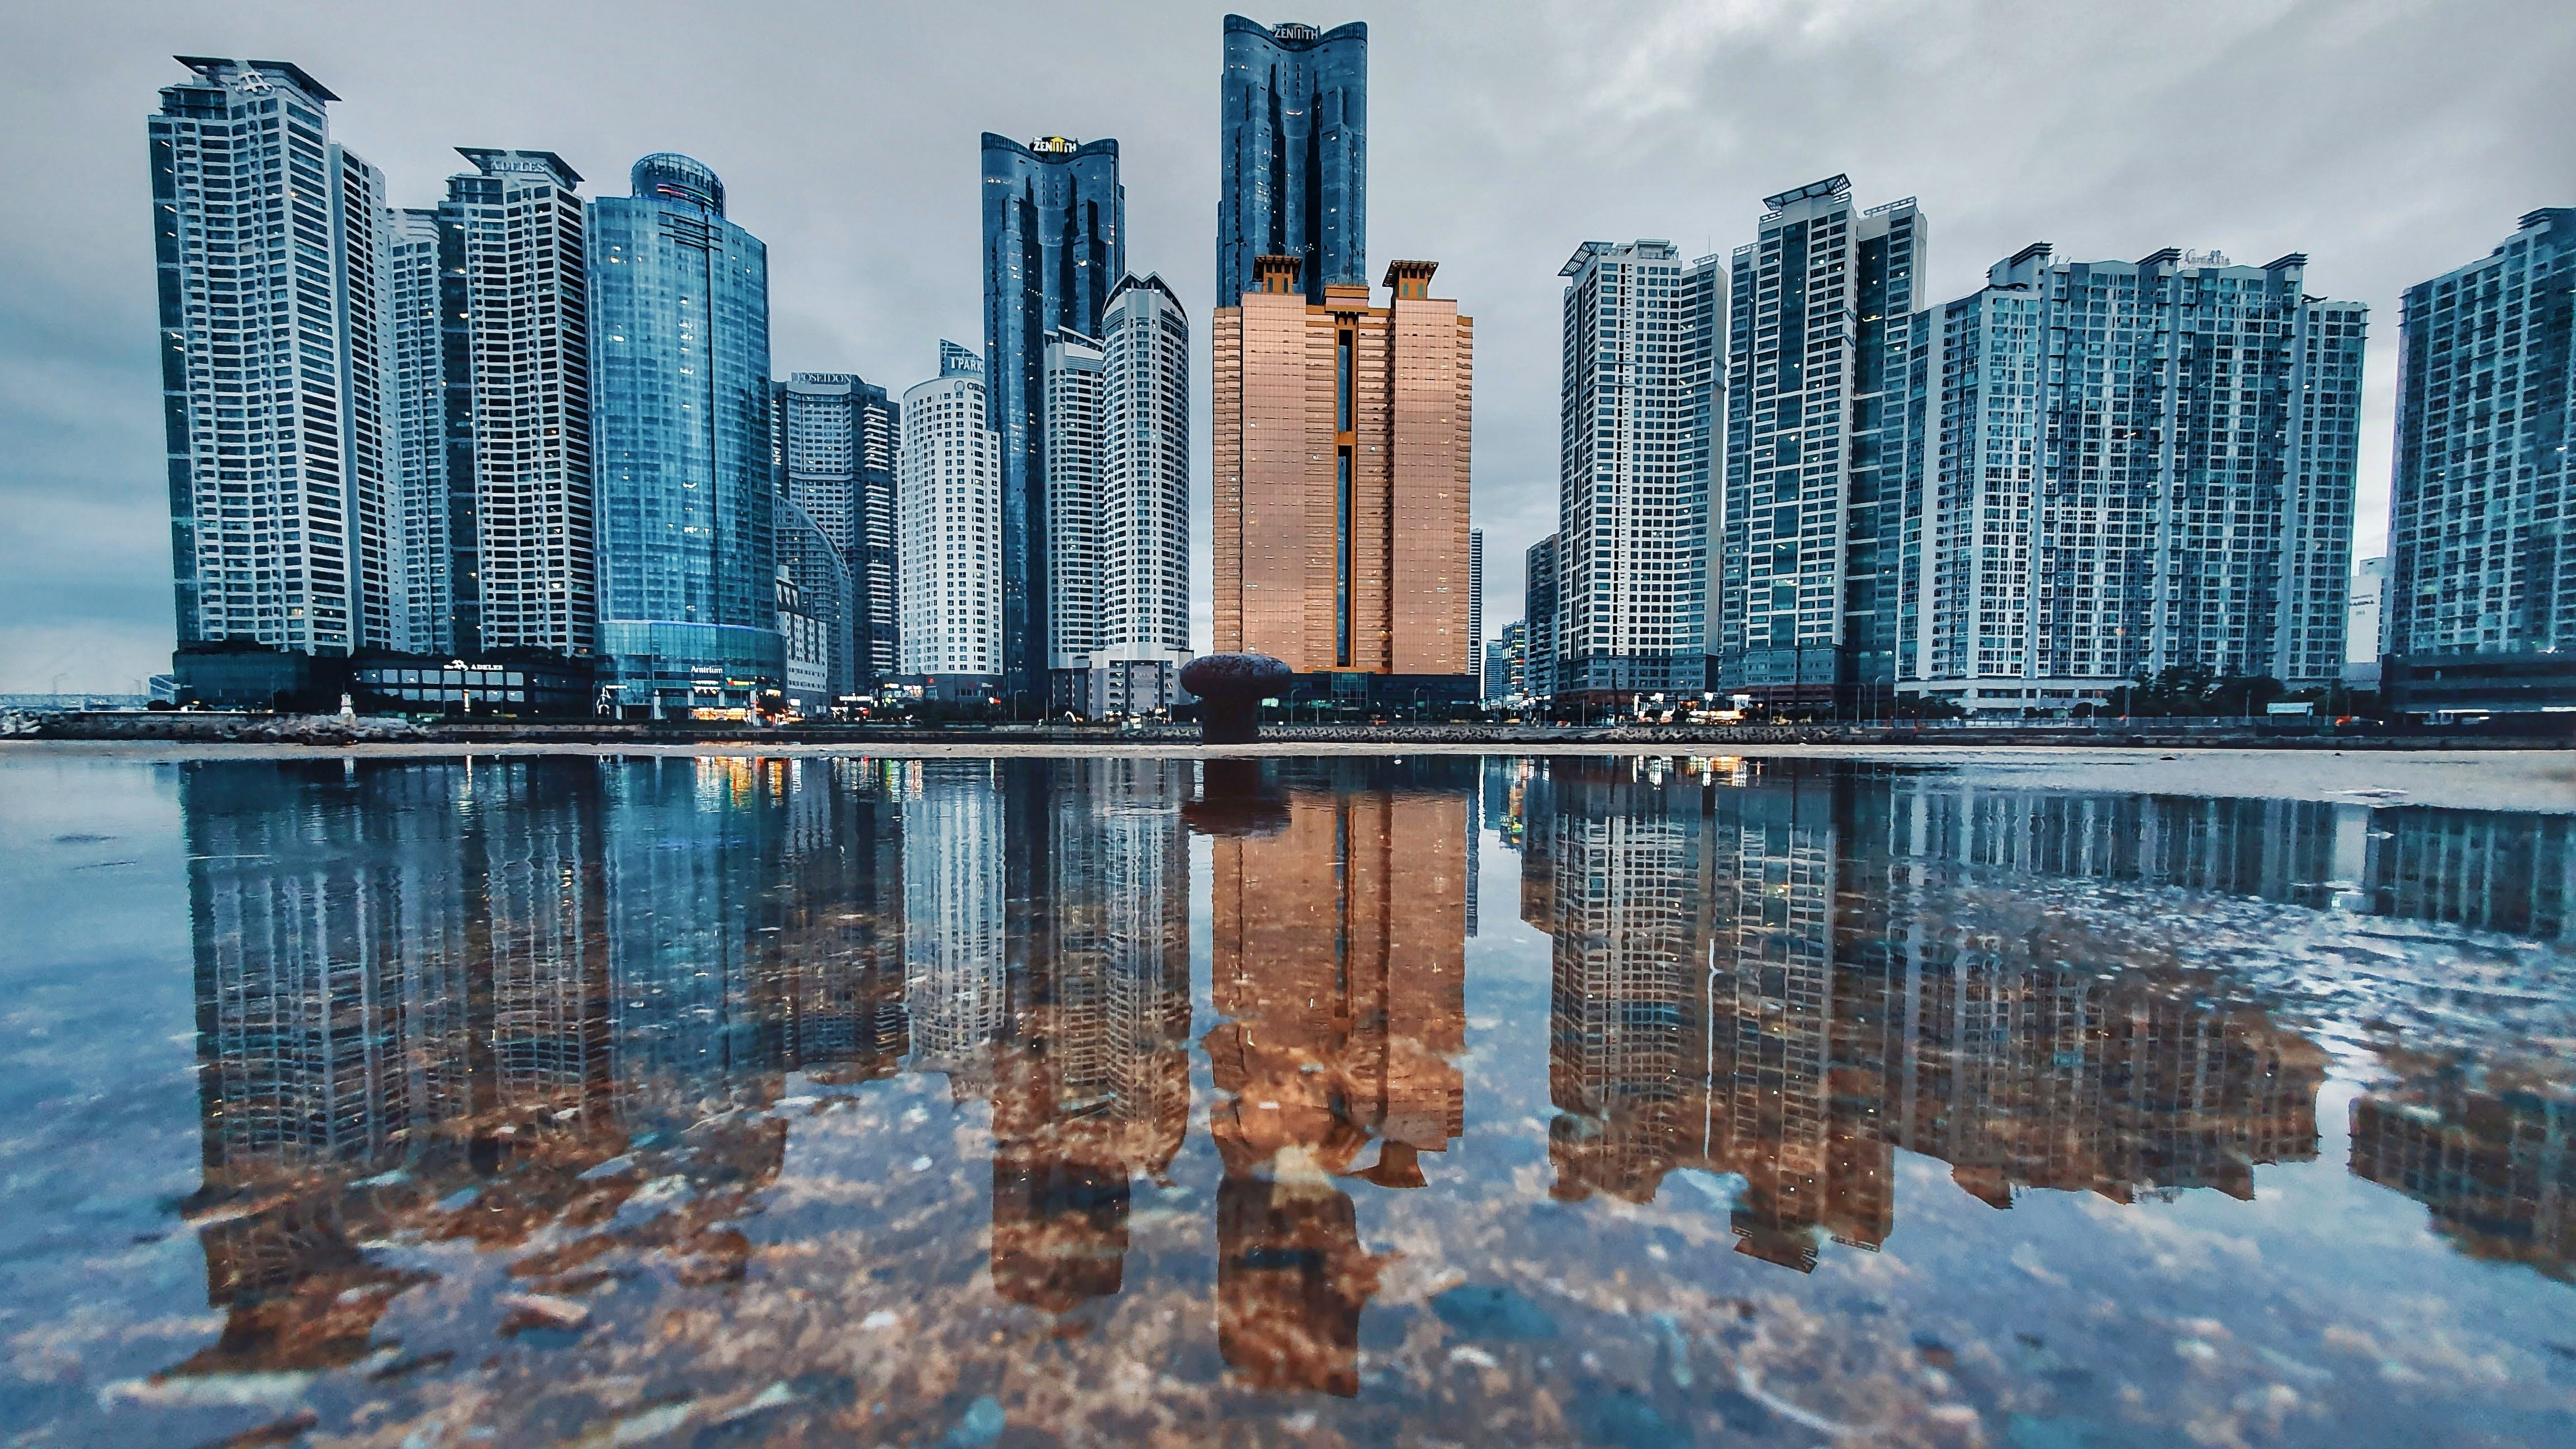 busan-bay-skyline-reflection-2 Your Perfect Day In Busan:  A Guide To 8 Remarkable Experiences in Korea